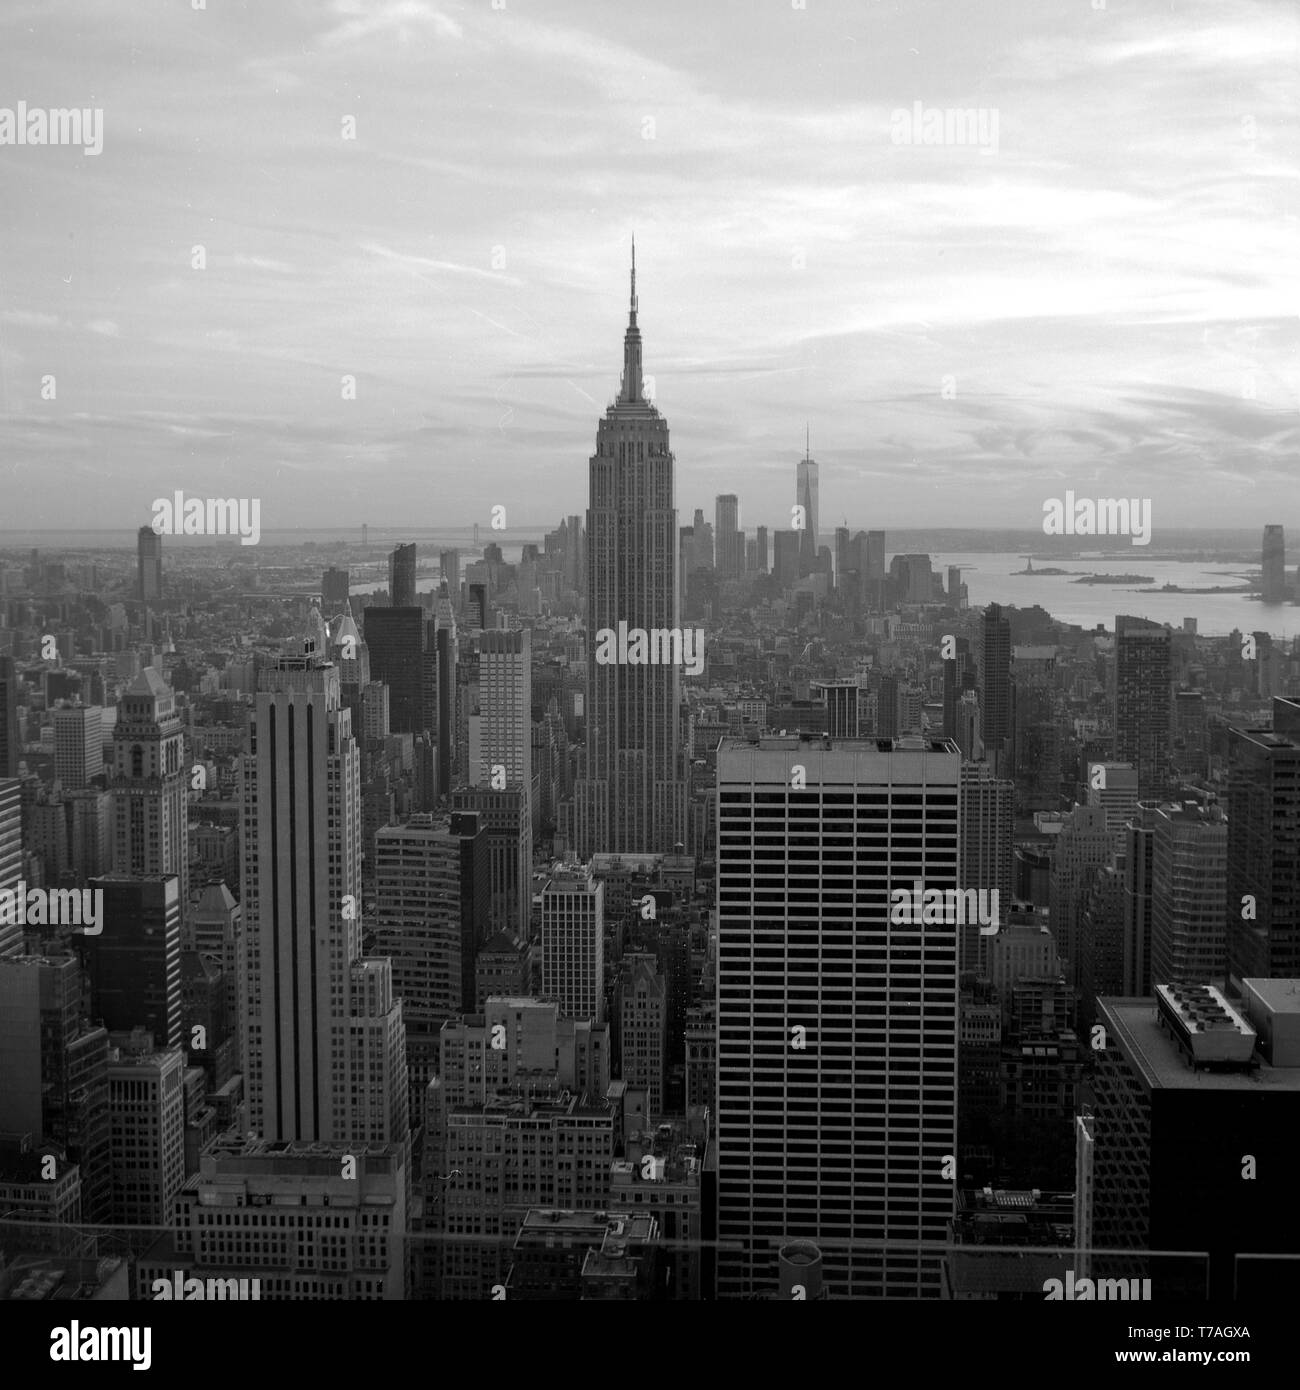 View Of Empire State Building And Lower Manhattan From Top Of The Rockefeller Center Stock Photo